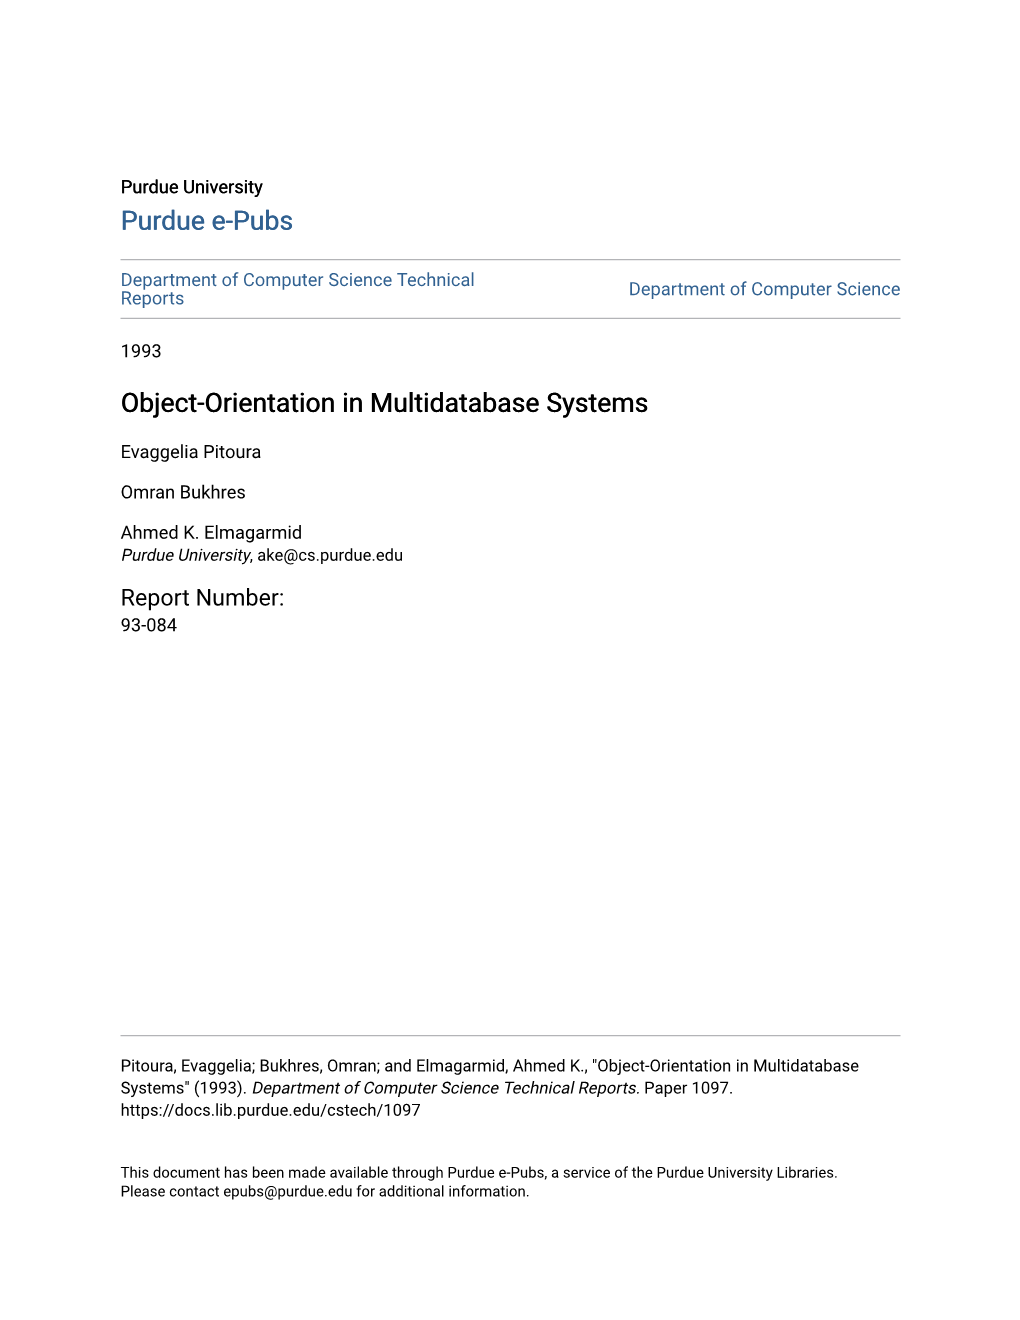 Object-Orientation in Multidatabase Systems